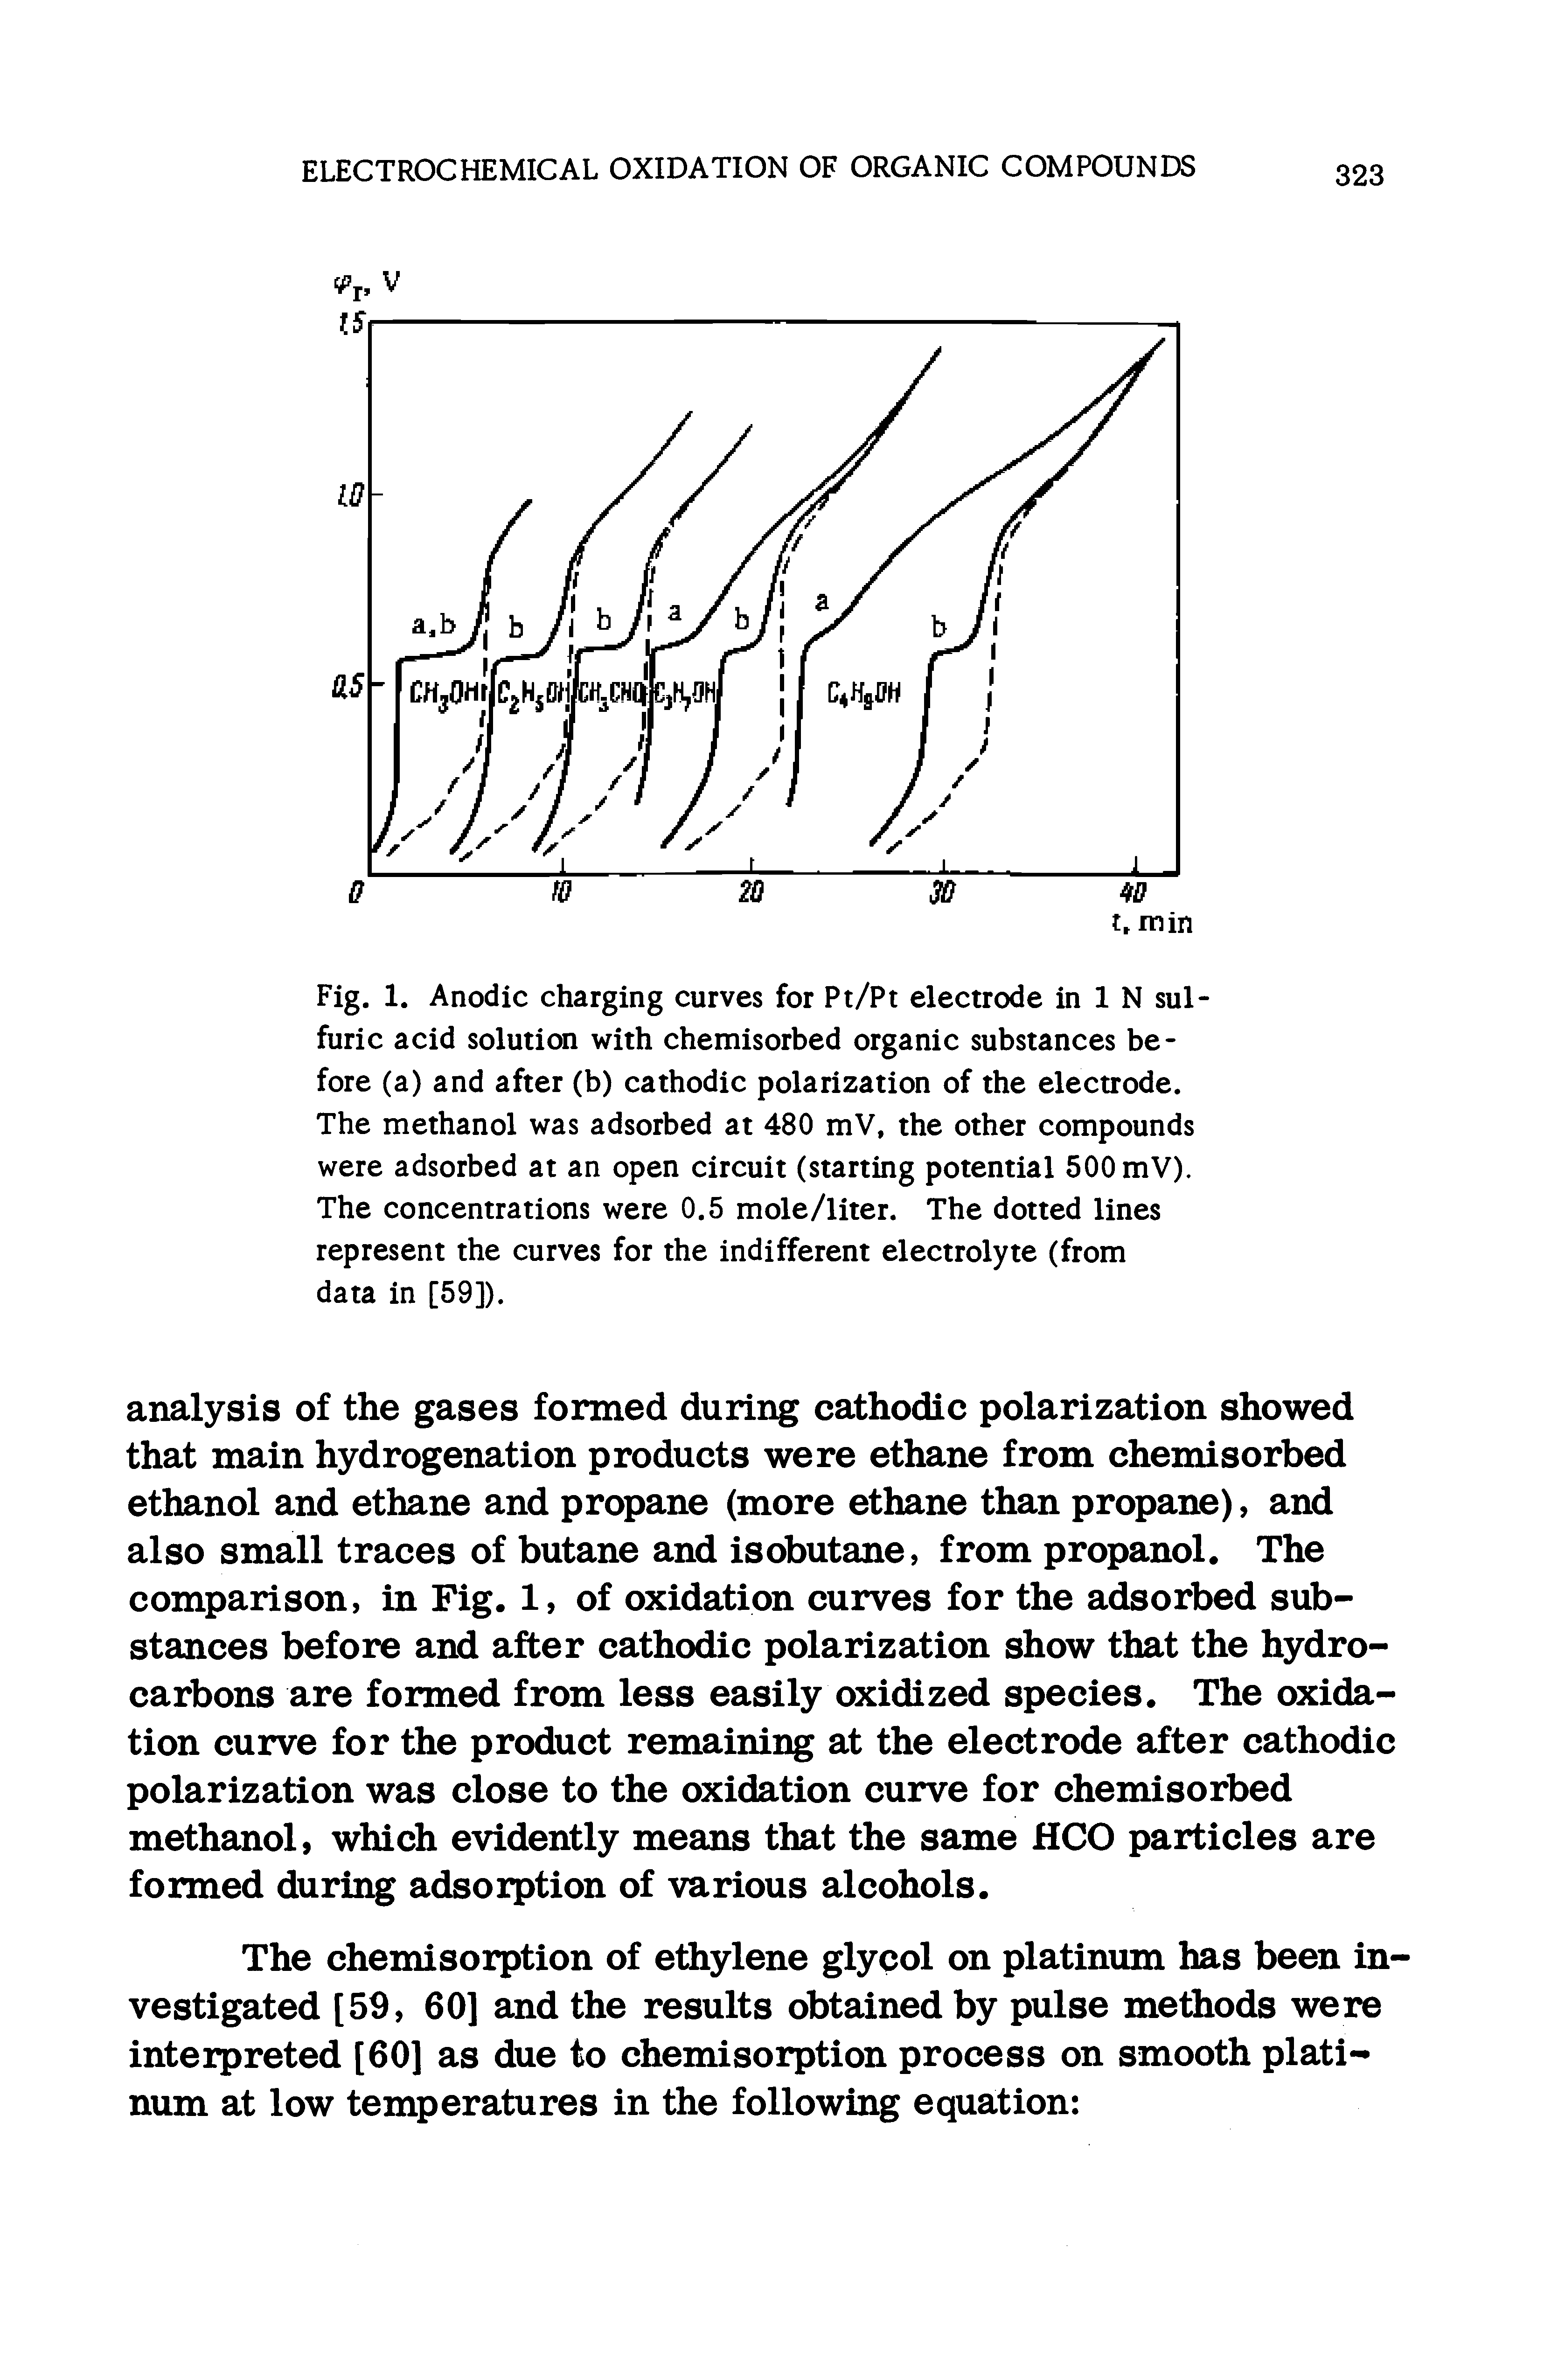 Fig. 1. Anodic charging curves for Pt/Pt electrode in 1 N sulfuric acid solution with chemisorbed organic substances before (a) and after (b) cathodic polarization of the electrode. The methanol was adsorbed at 480 mV, the other compounds were adsorbed at an open circuit (starting potential 500 mV). The concentrations were 0.5 mole/liter. The dotted lines represent the curves for the indifferent electrolyte (from data in [59]).